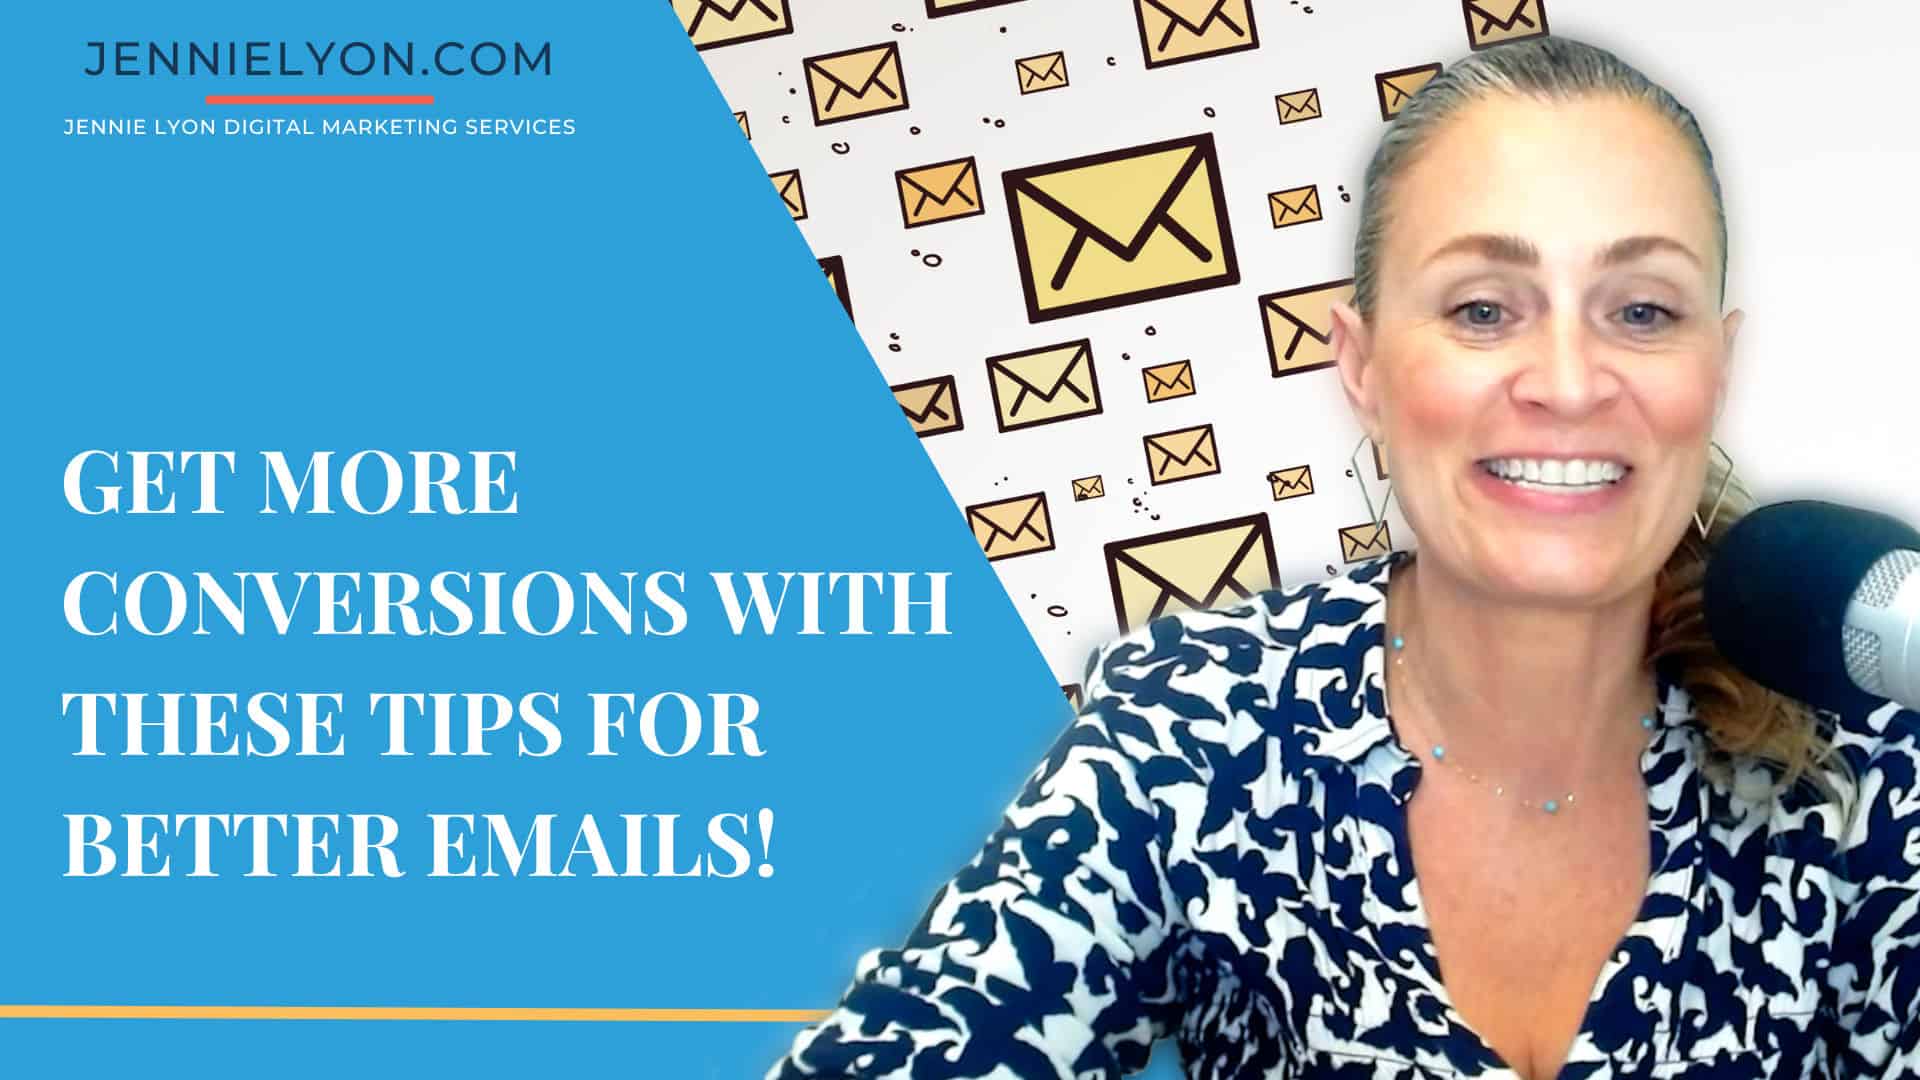 Get More Covnersions with These Tips for Better Emails!